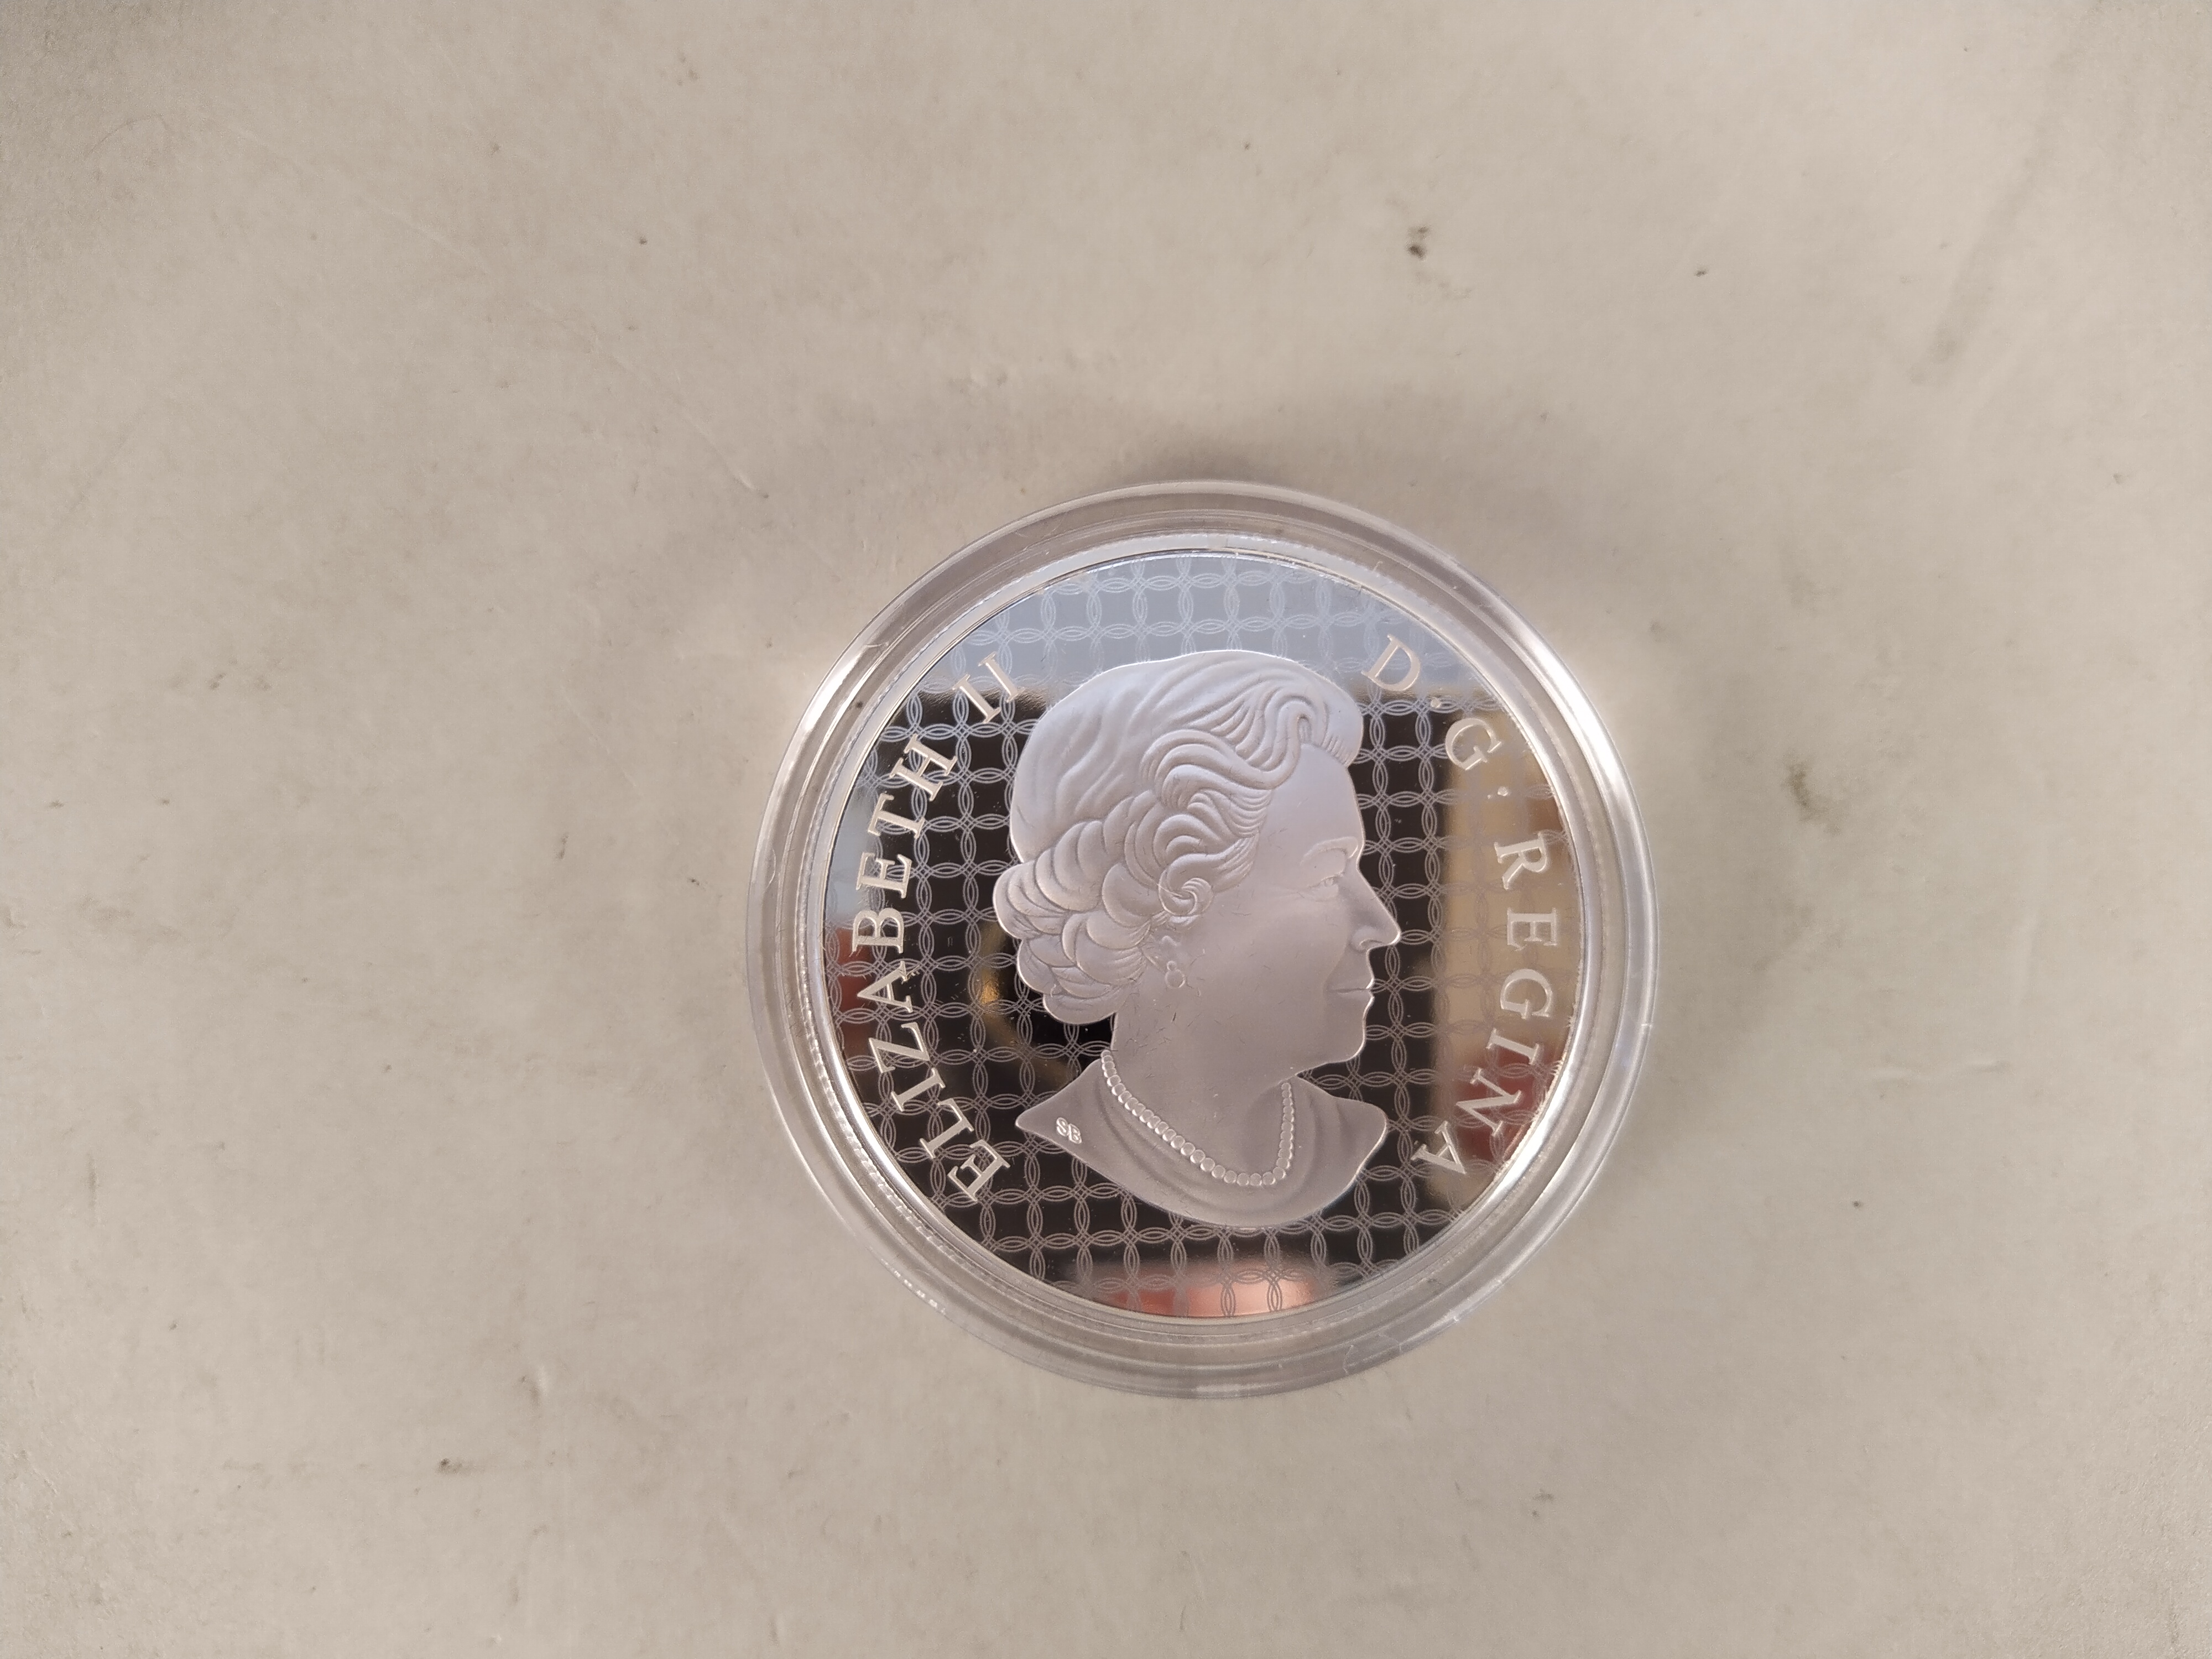 A boxed Royal Canadian mint 30 dollar commemorative coin, - Image 3 of 3